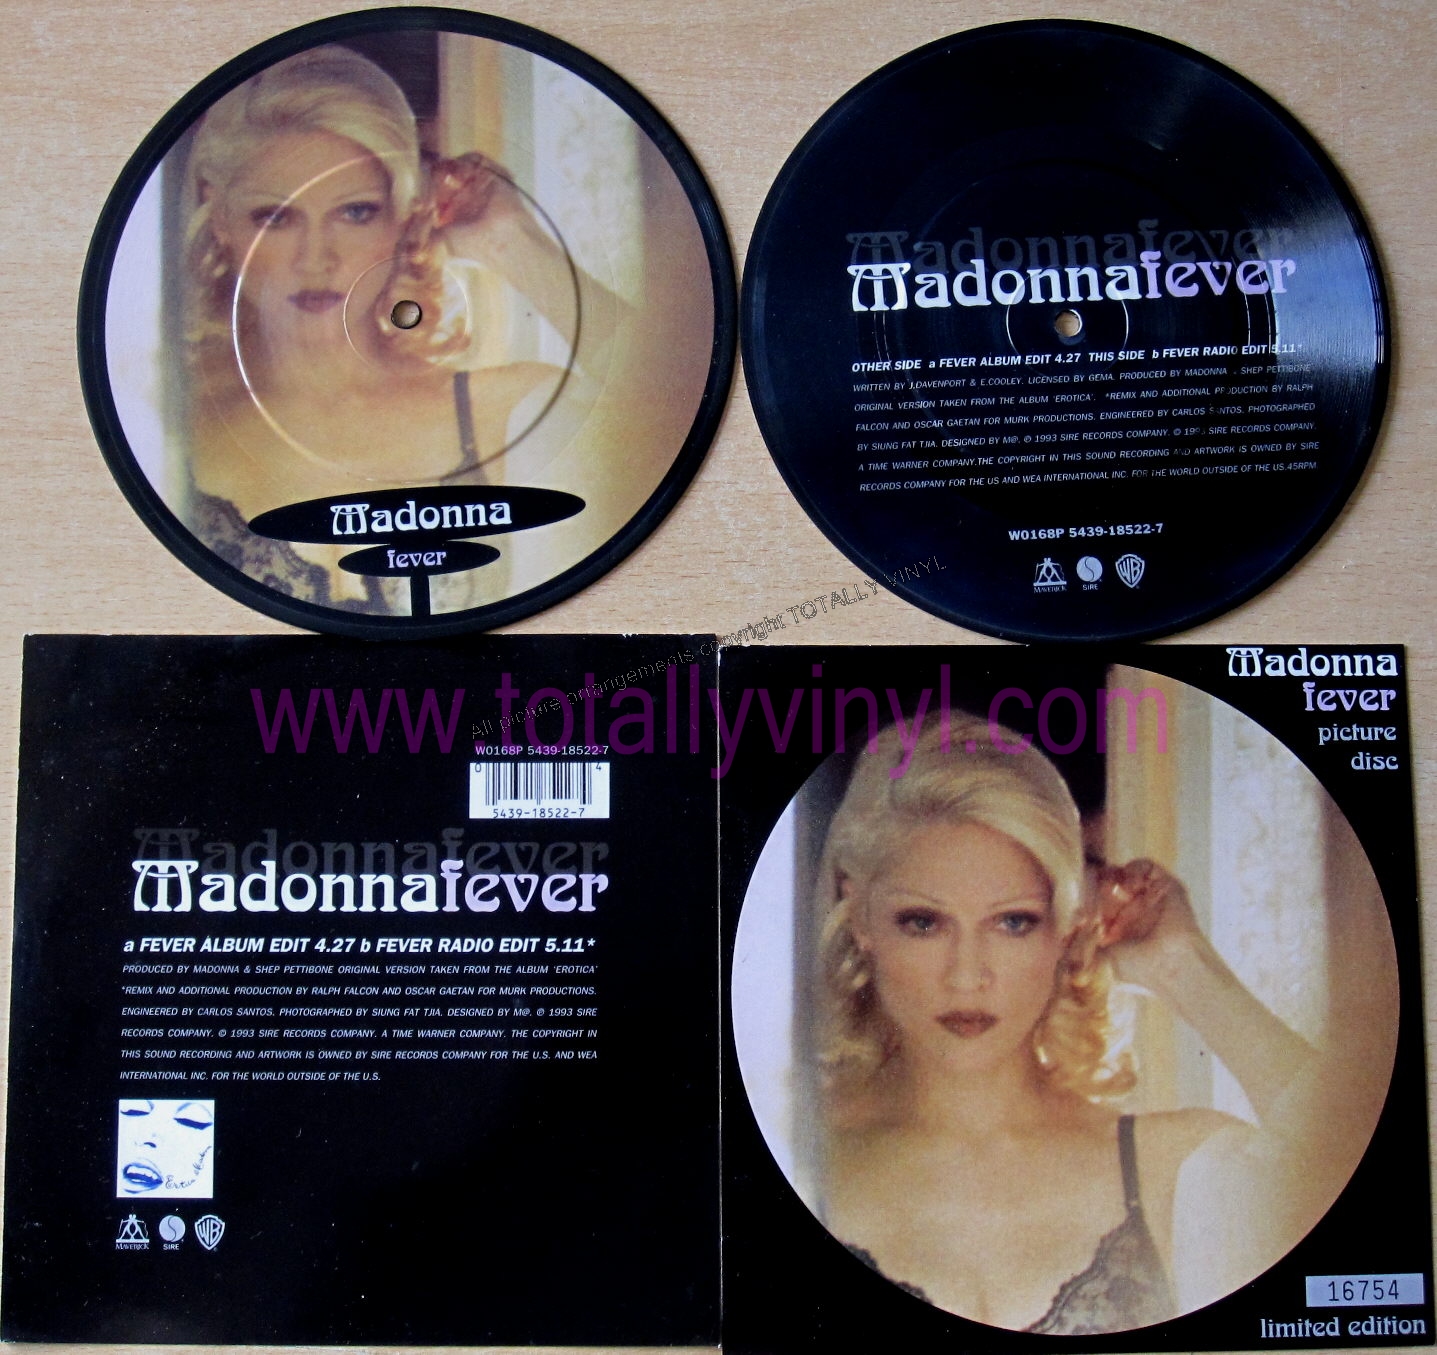 MADONNA_FEVER_PICTURE_DISC_7_16754.jpg